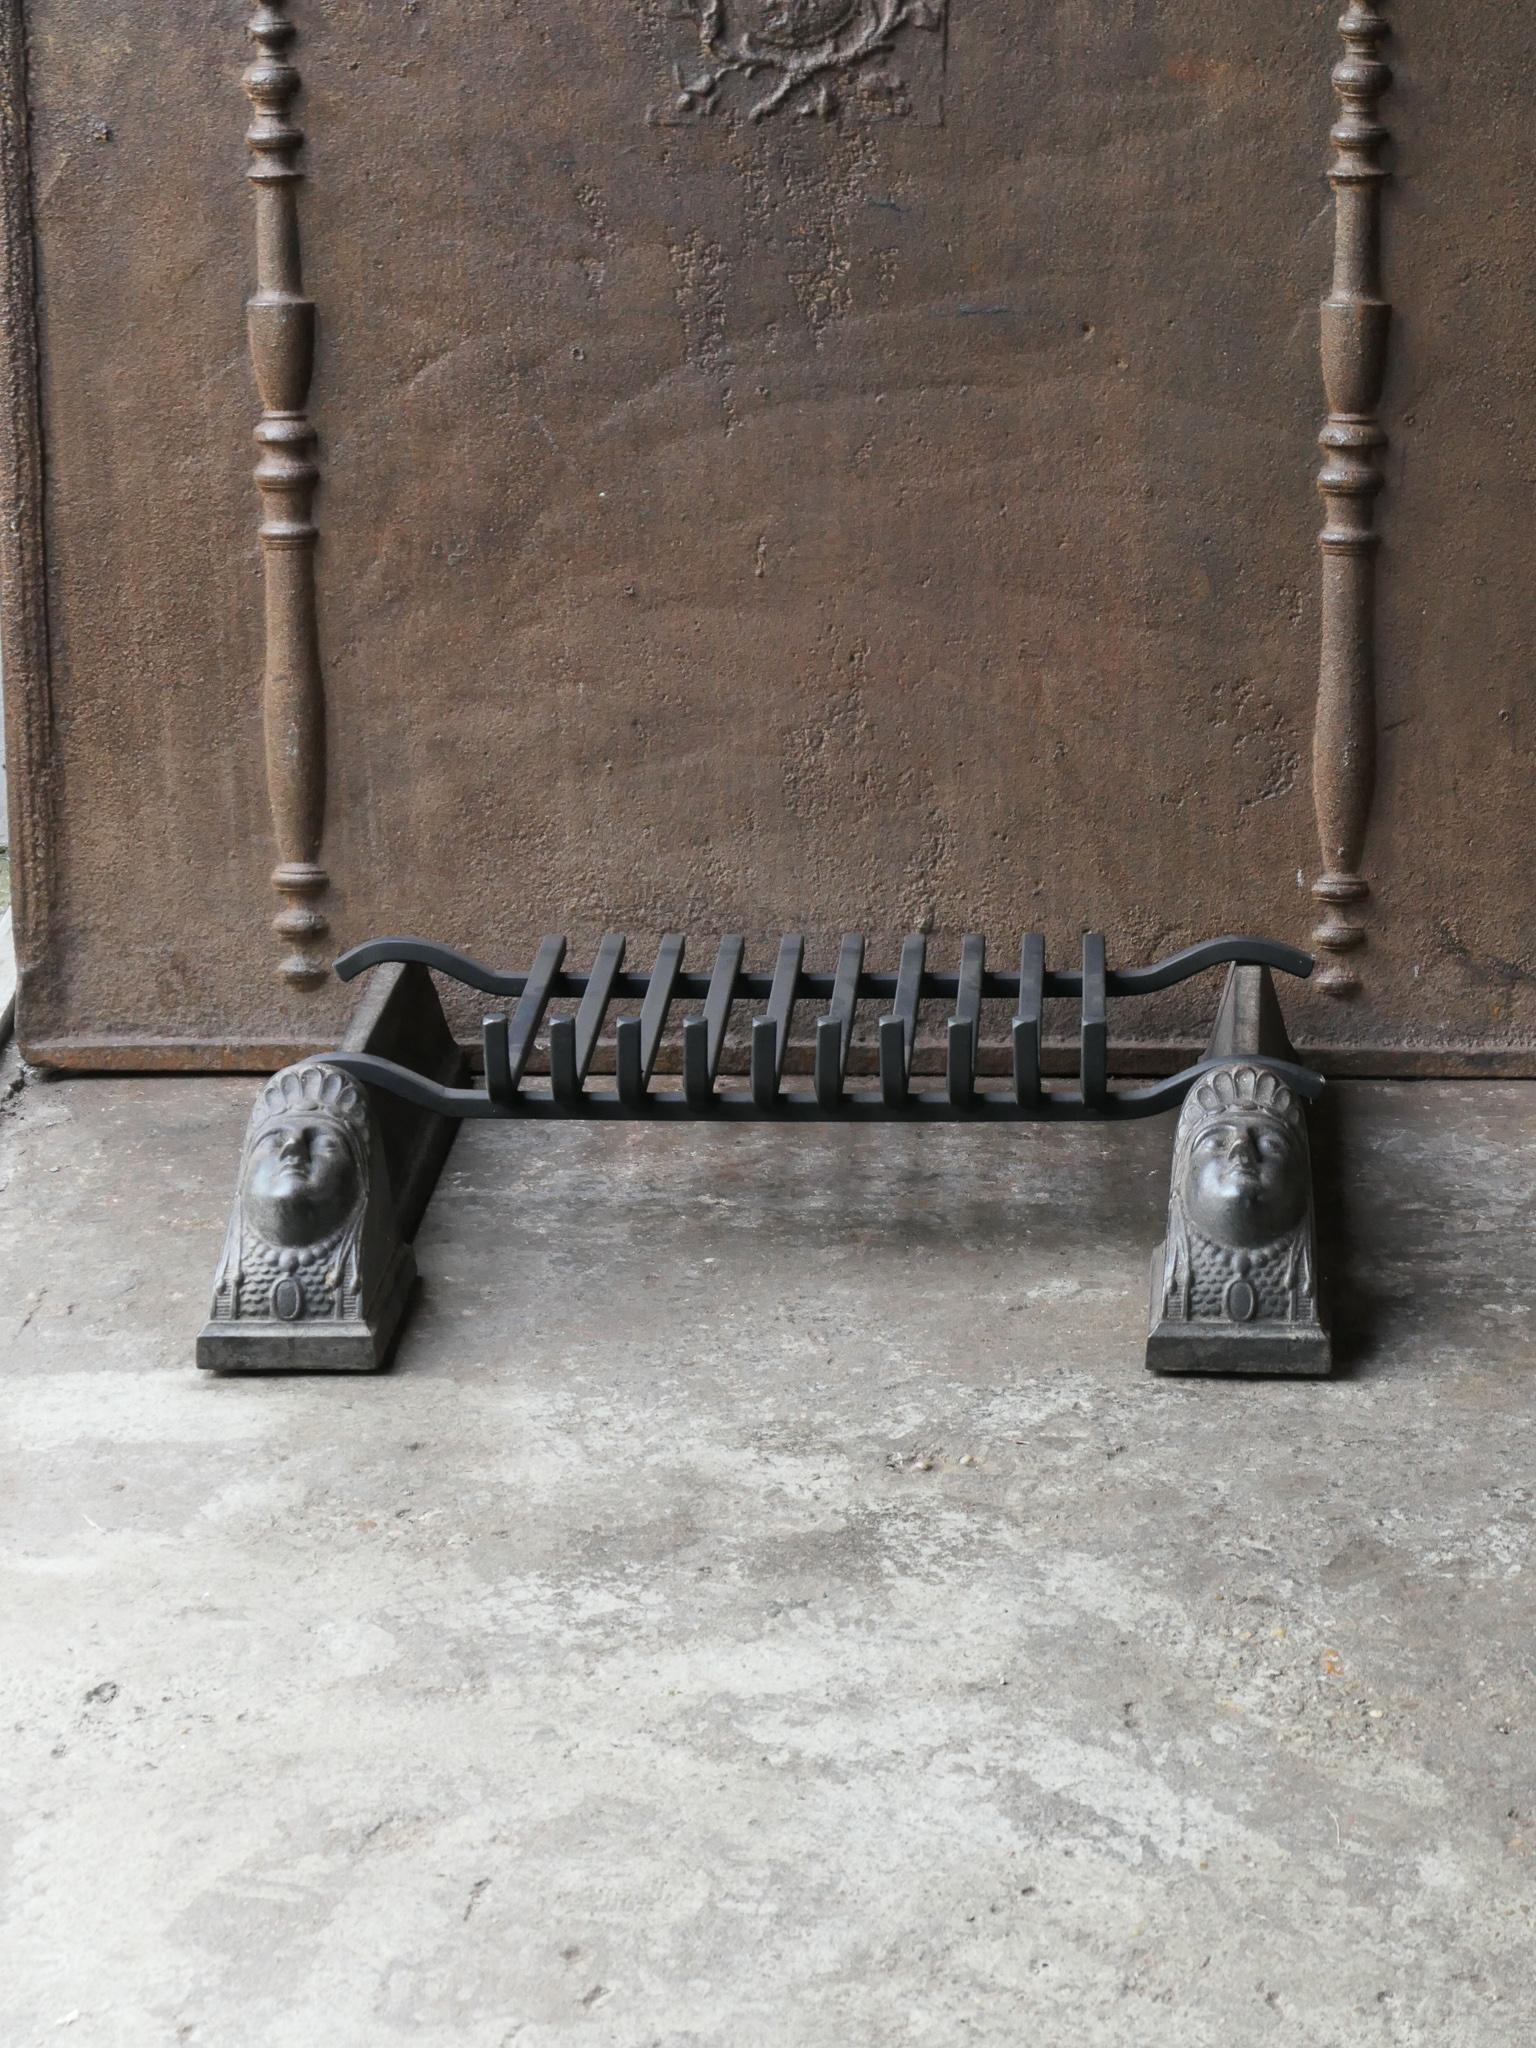 18th-19th century French neoclassical fireplace basket - fire basket made of cast iron and wrought iron. The basket is in a good condition and is fully functional.